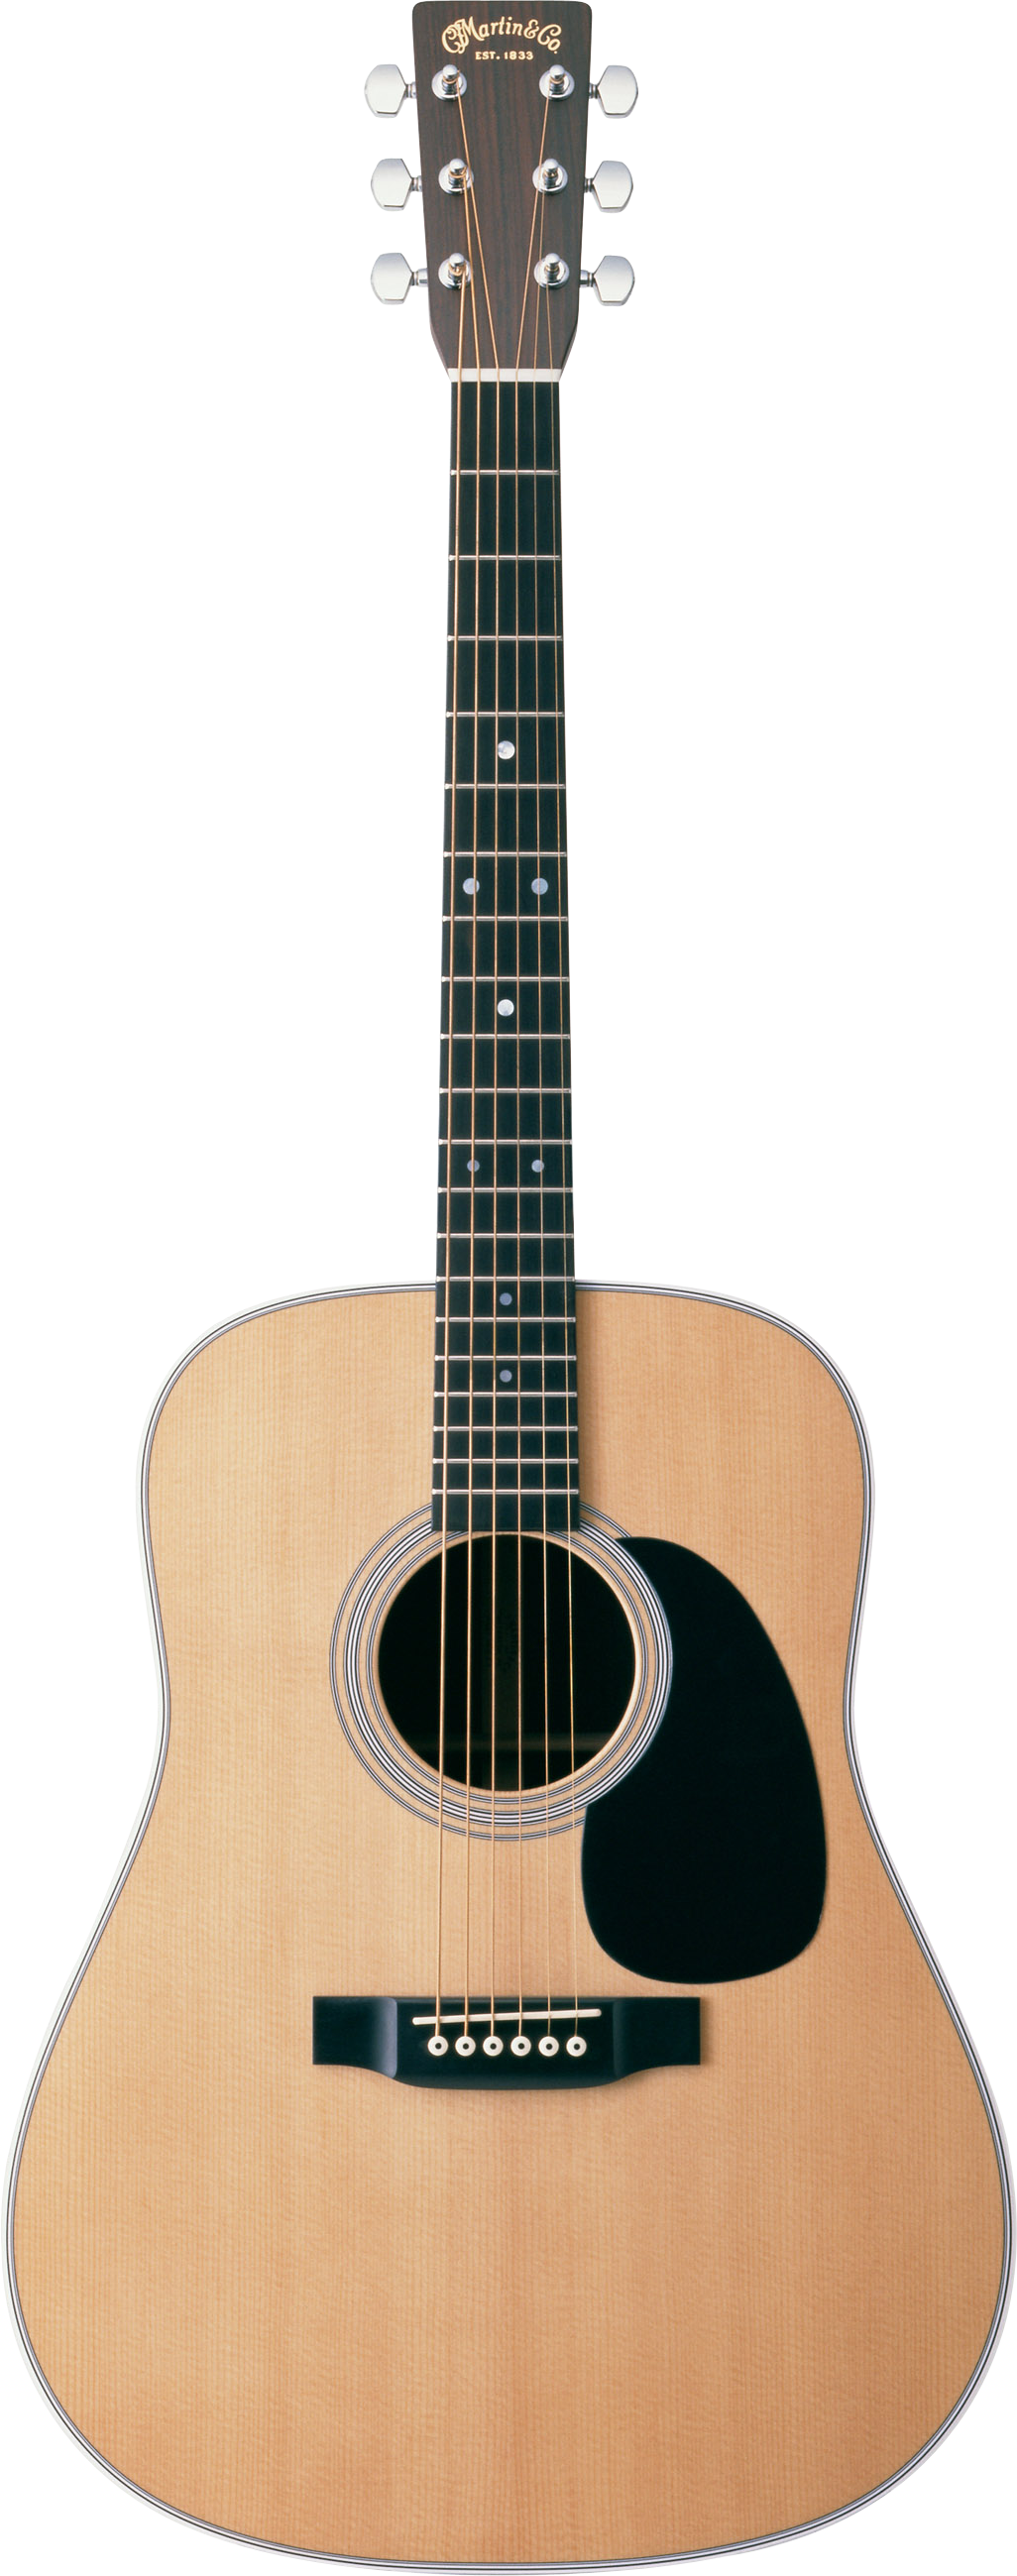 Acoustic Guitar Free Png Image PNG Image